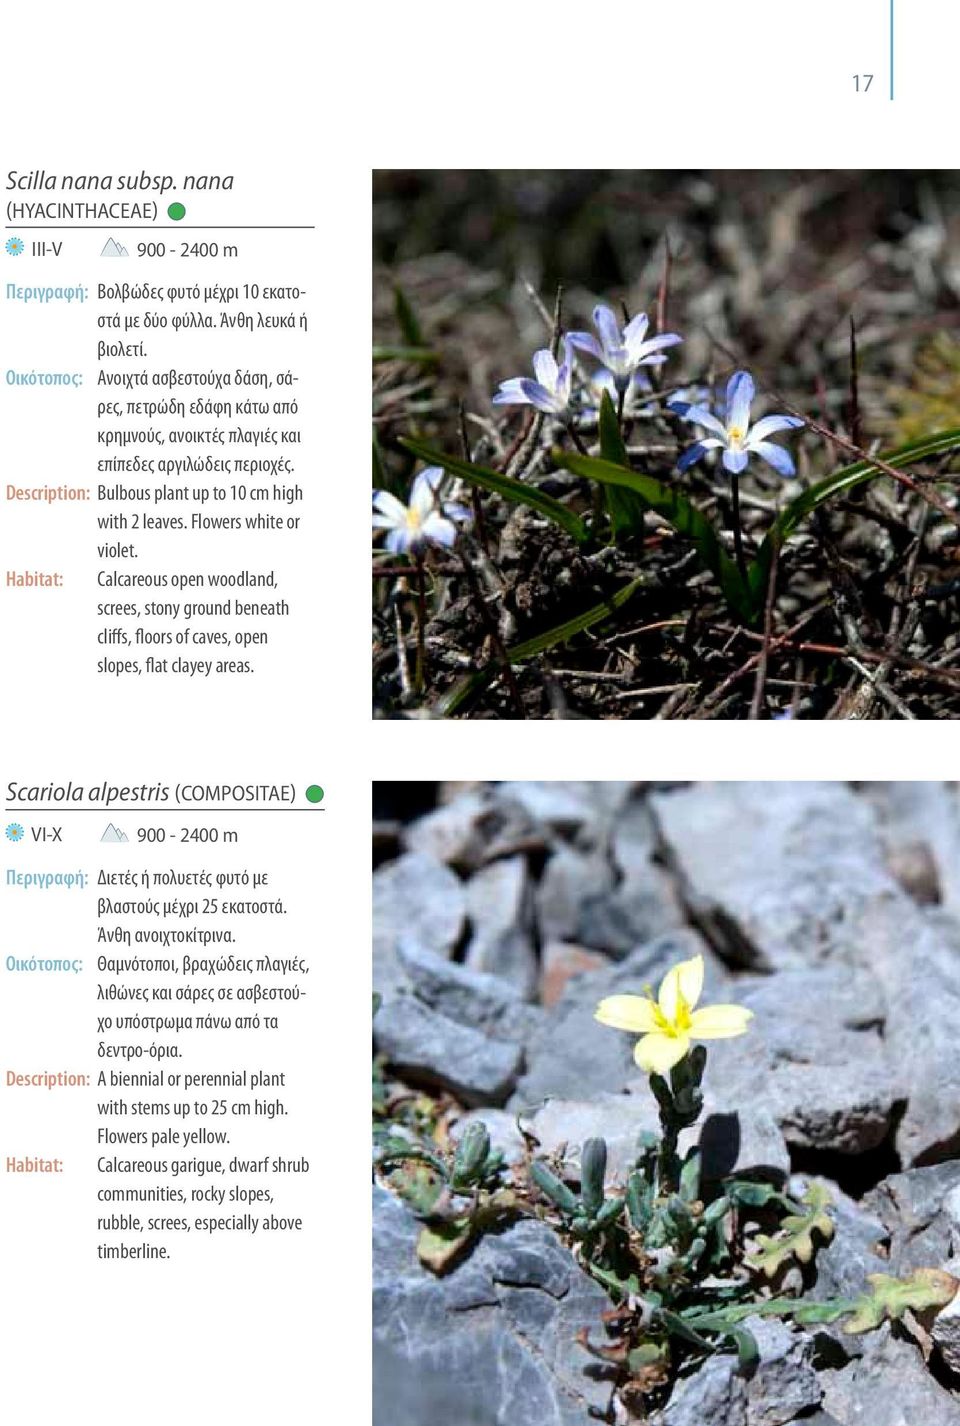 Flowers white or violet. Habitat: calcareous open woodland, screes, stony ground beneath cliffs, floors of caves, open slopes, flat clayey areas.